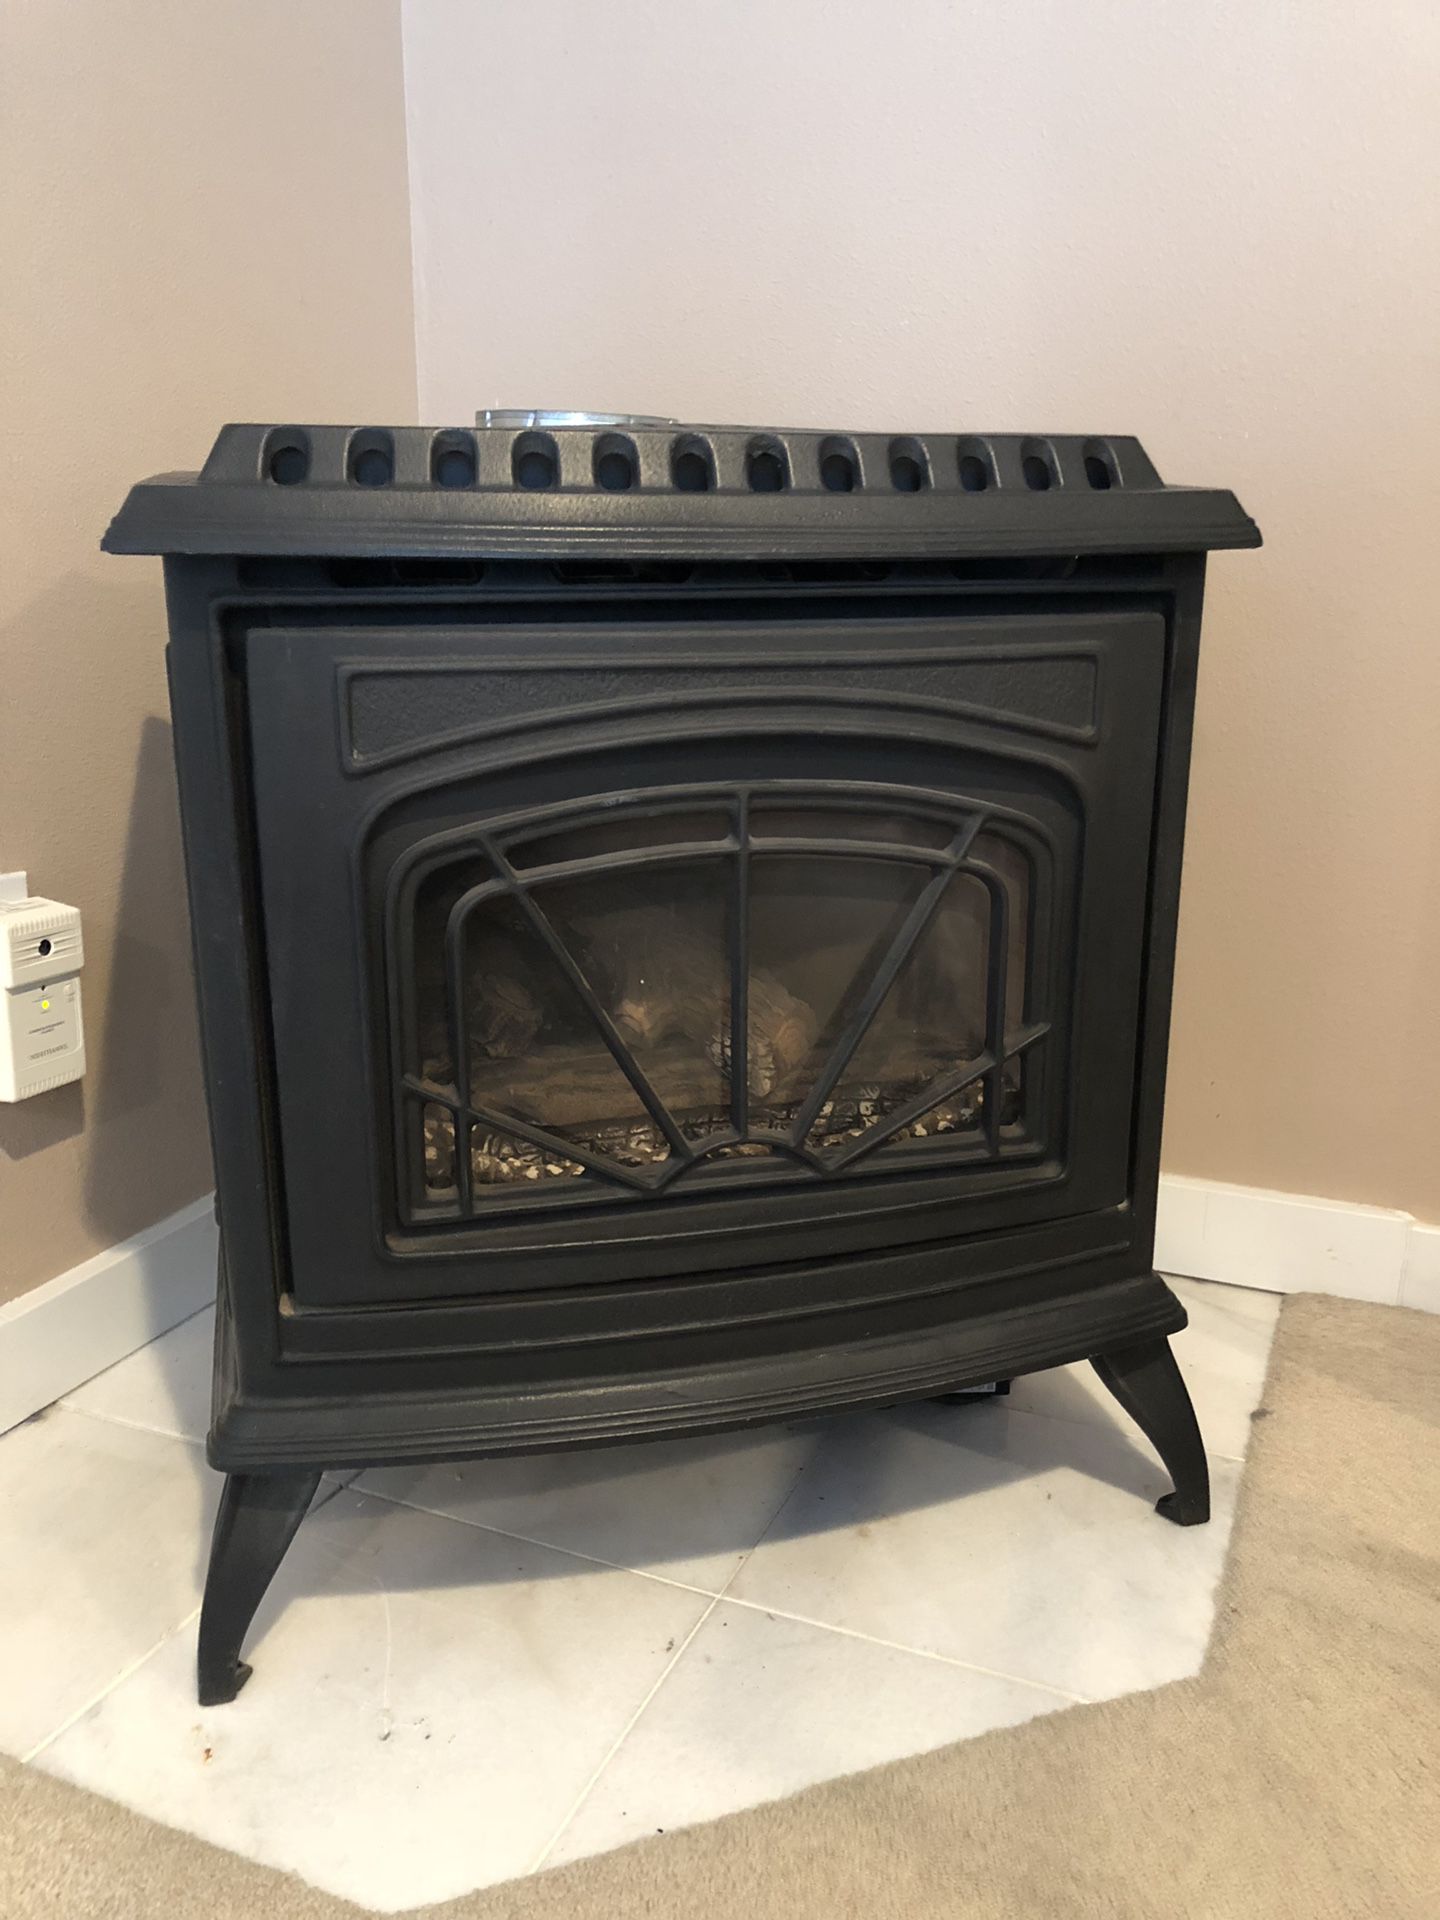 Waterford freestanding gas stove